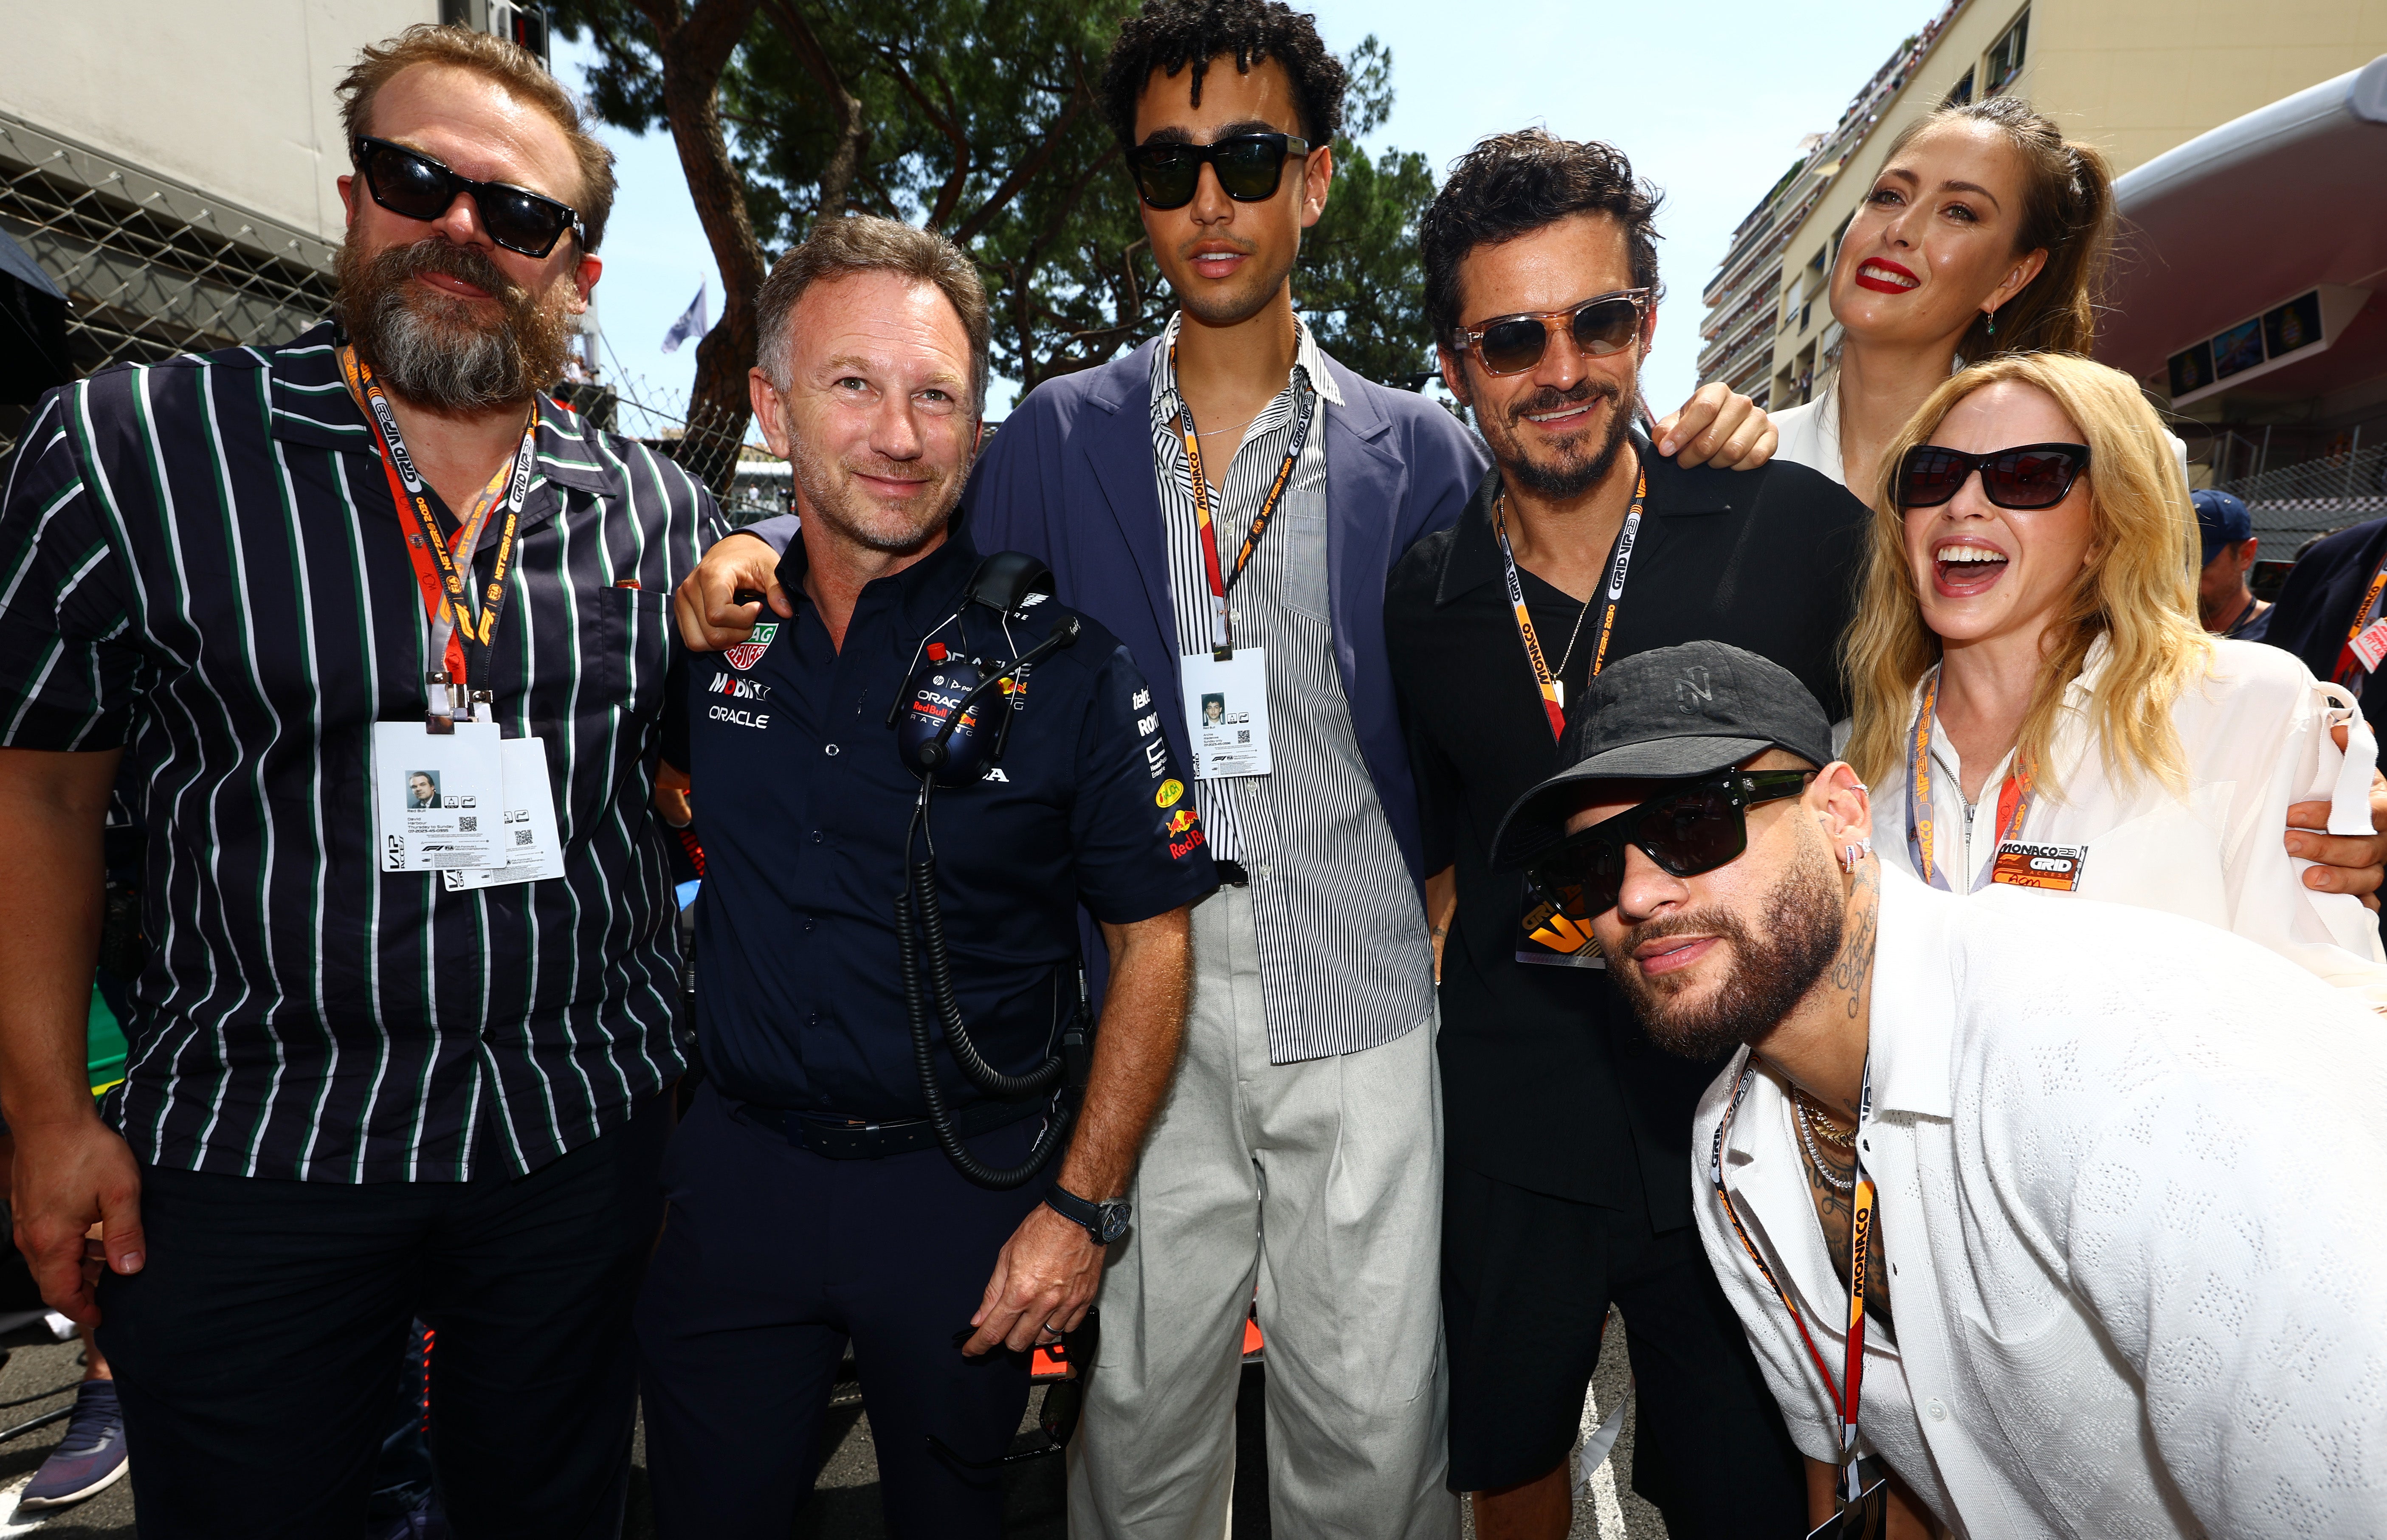 (L-R) David Harbour, Red Bull Racing Team Principal Christian Horner, Archie Madekwe, Orlando Bloom, Neymar, Maria Sharapova and Kylie Minogue pose for a photo on the grid during the F1 Grand Prix of Monaco at Circuit de Monaco on May 28, 2023